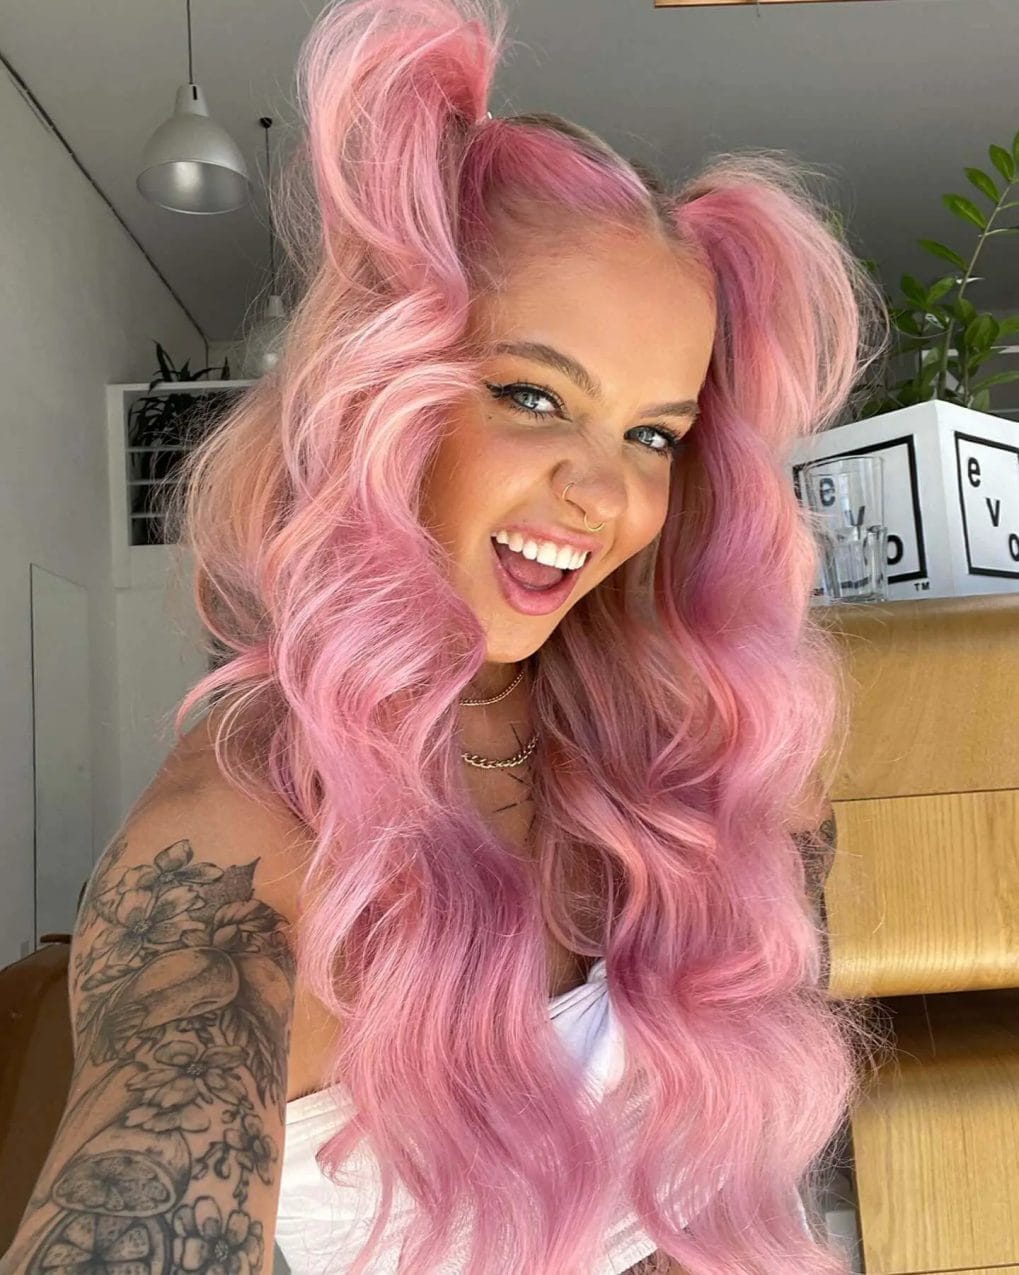 Playful bubblegum pink waves with twin top knots, embodying the carefree energy of festival fashion.